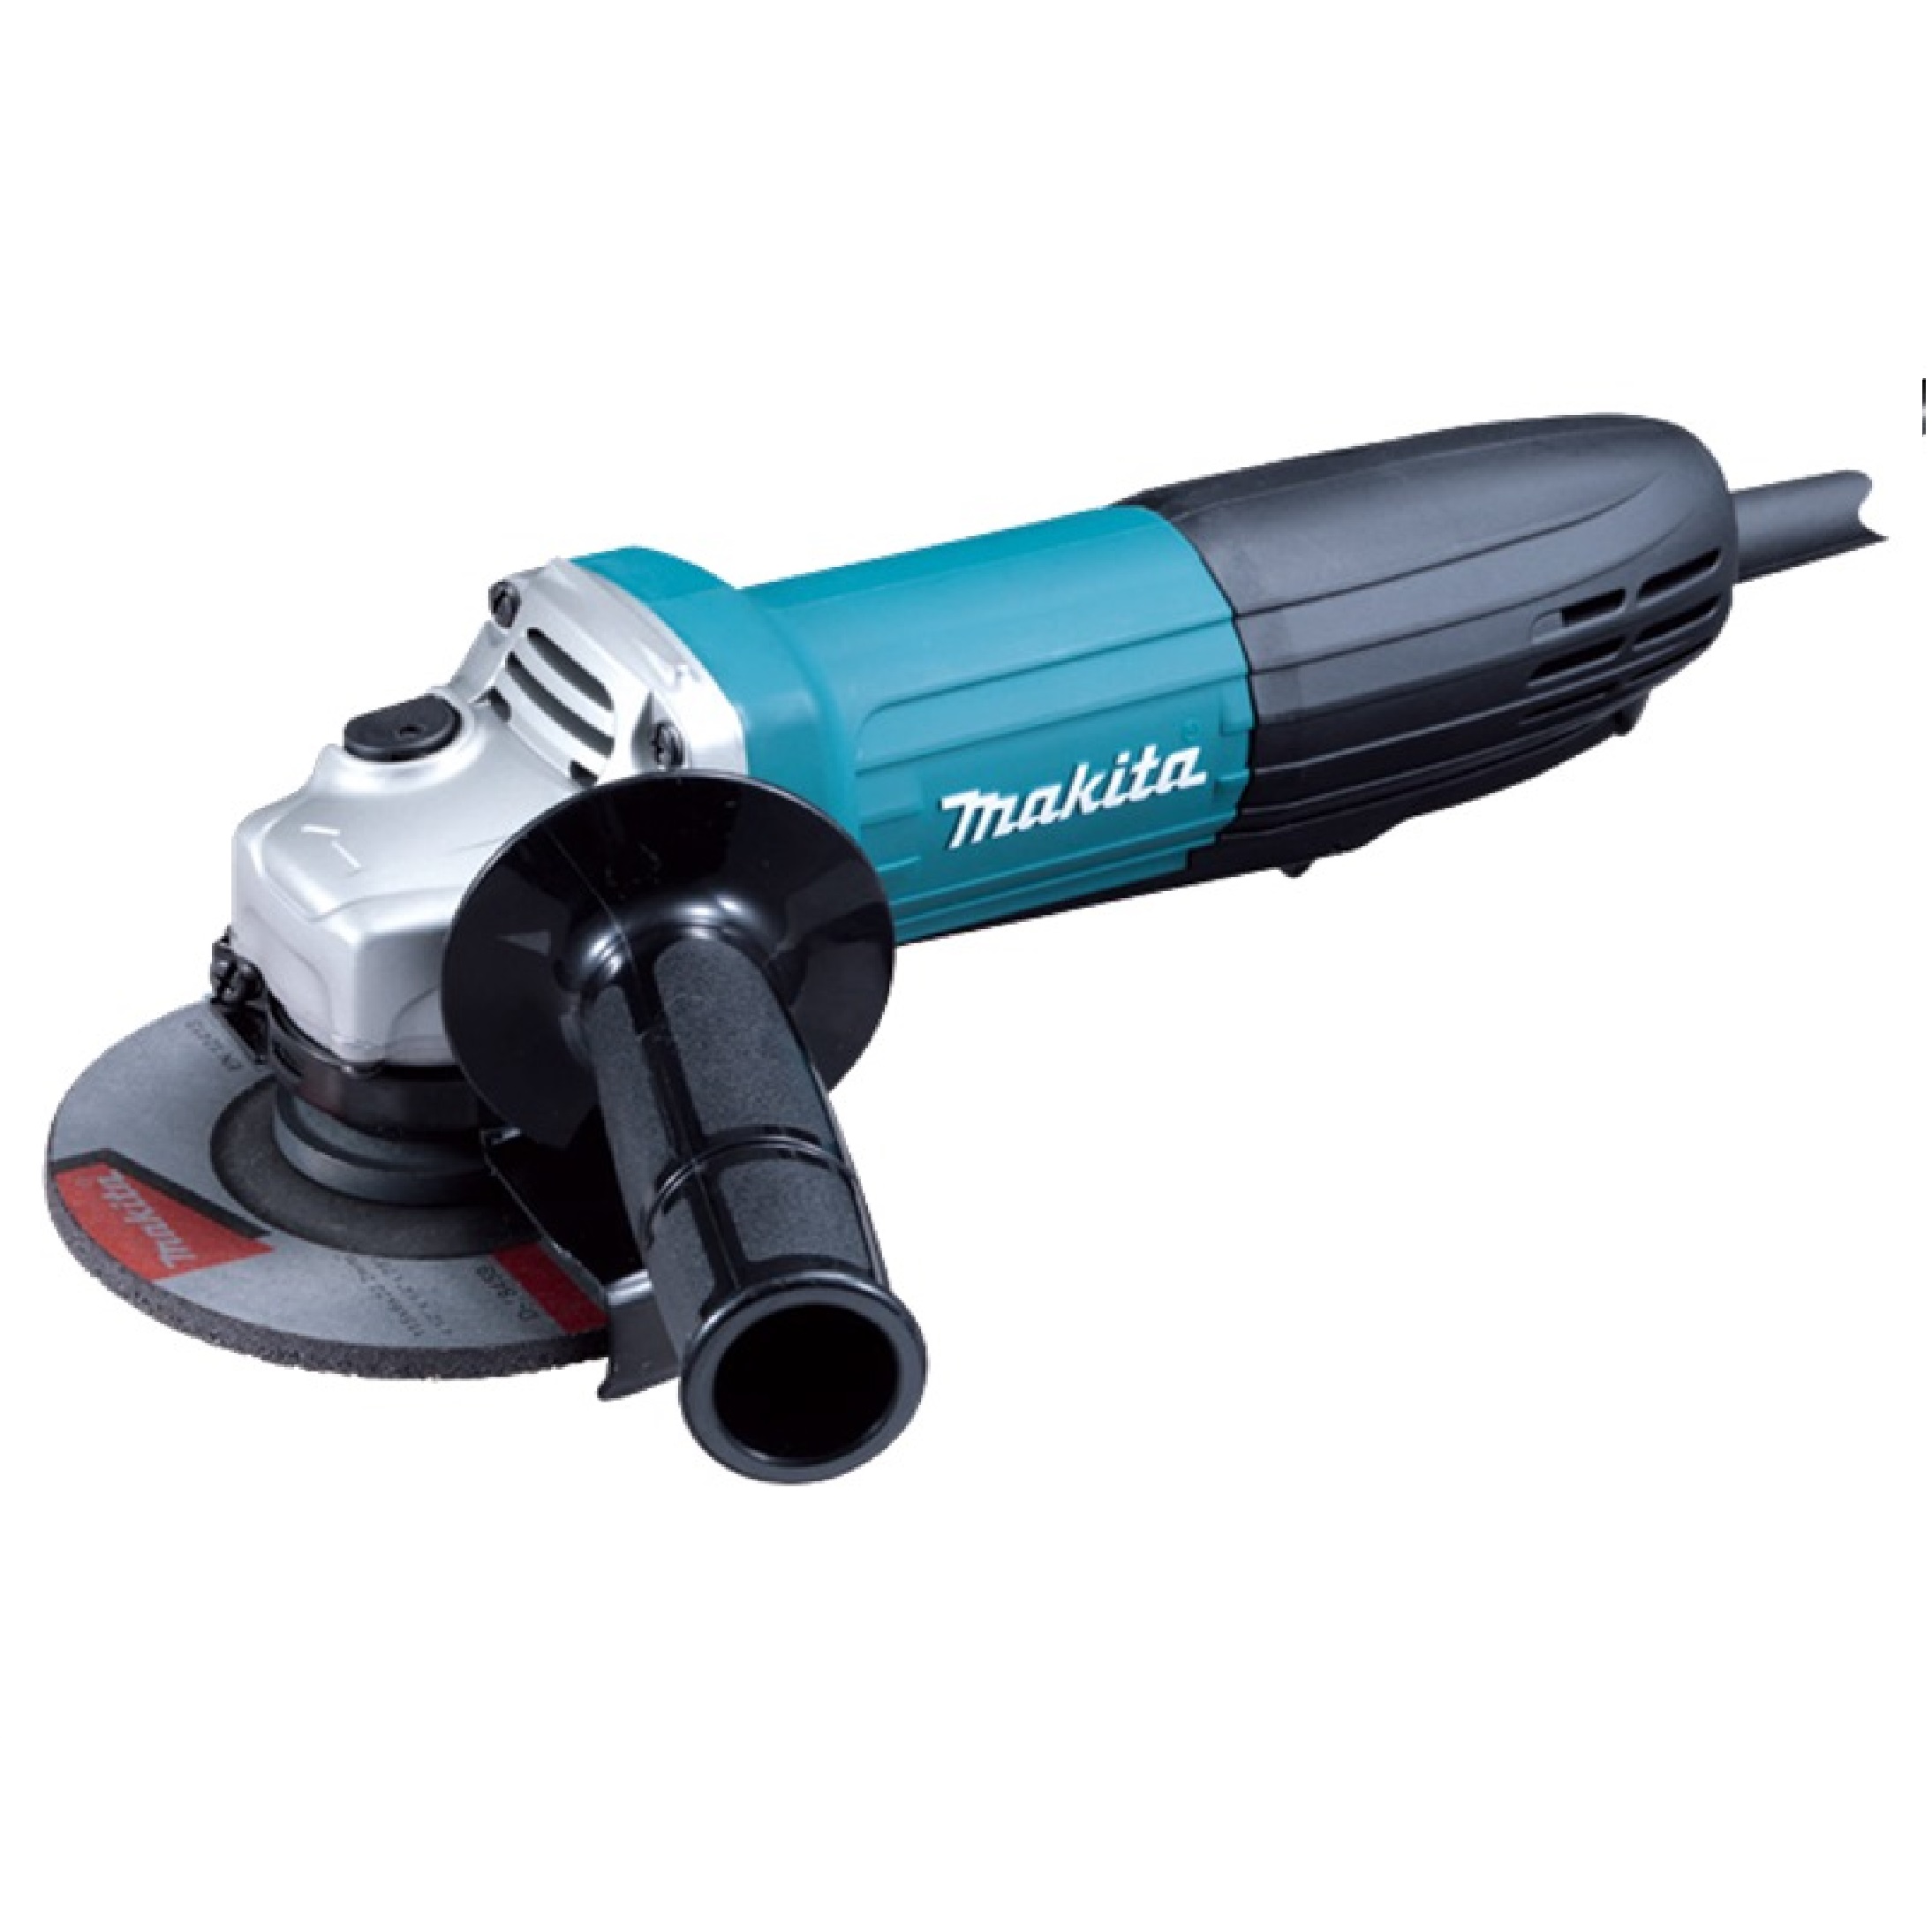 Makita GA4534 115MM (4-1/2") Angle Grinder With Paddle Switch 720W